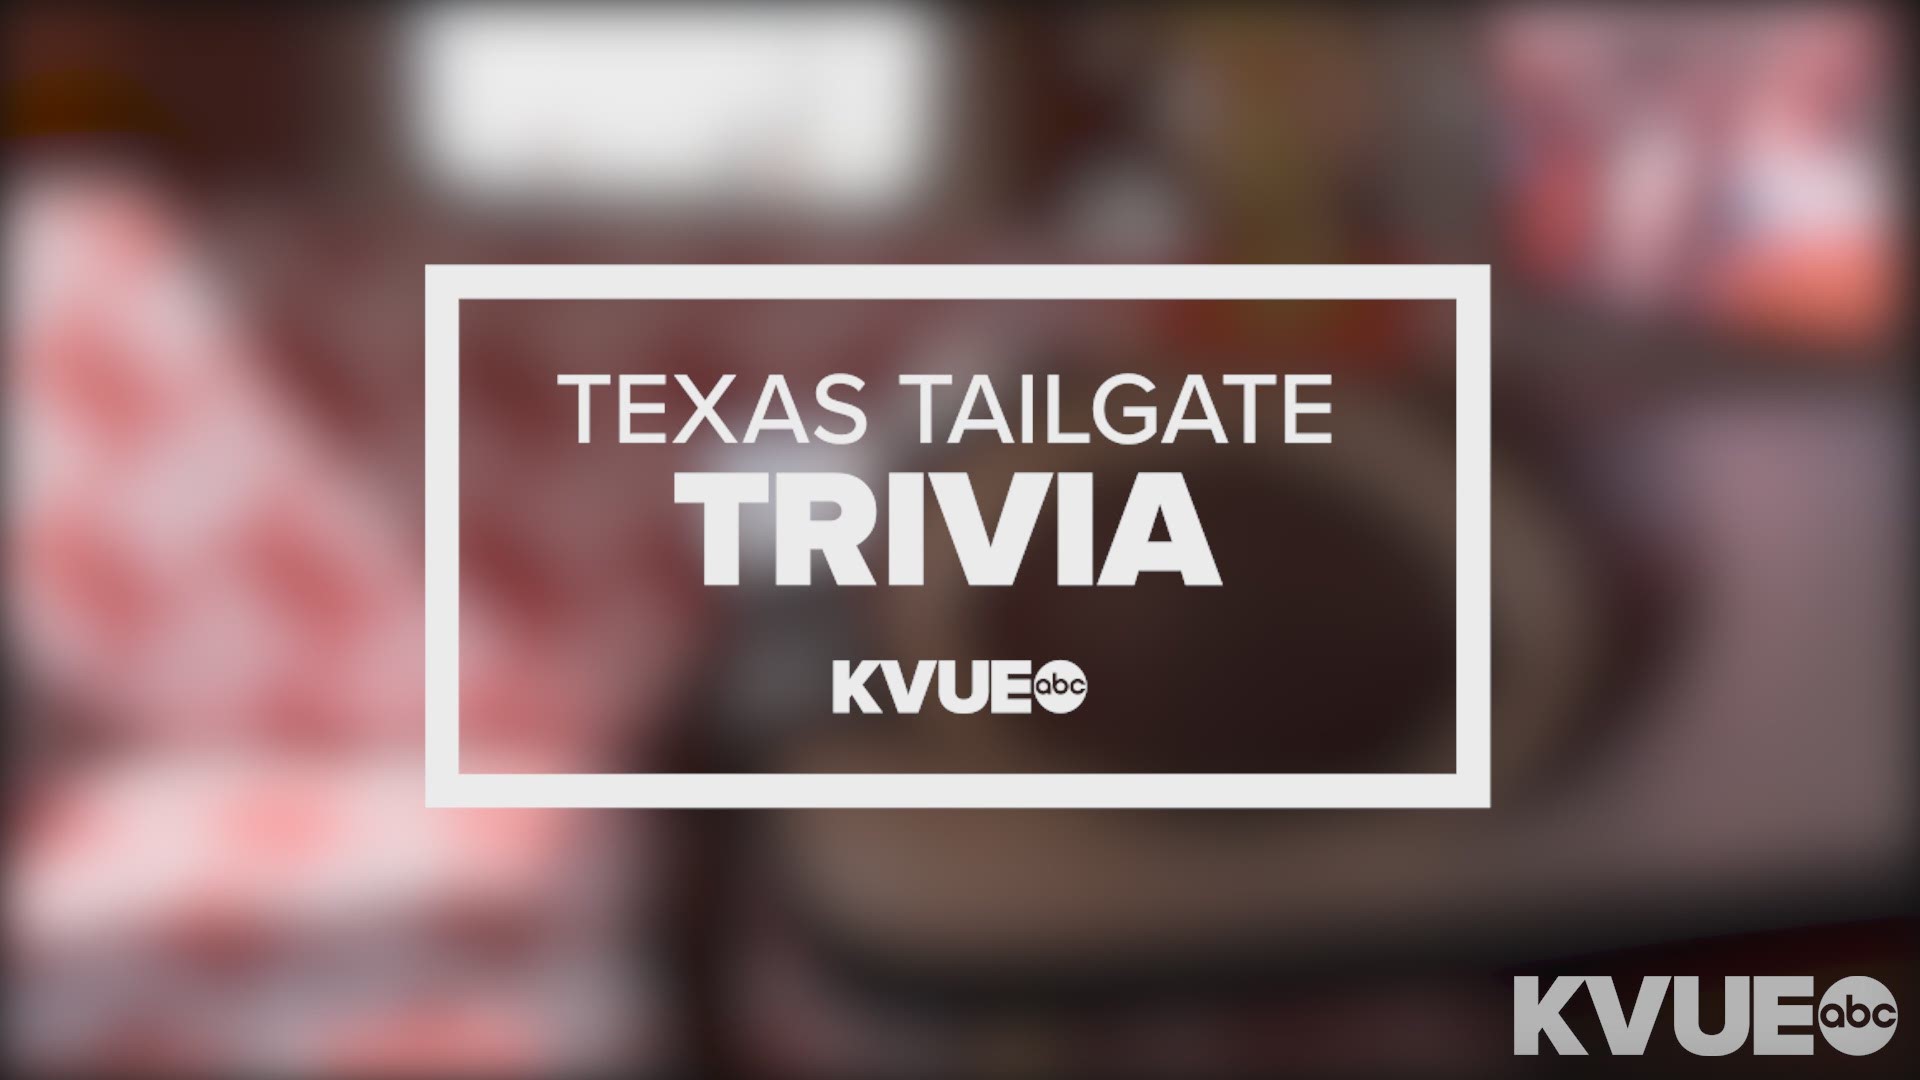 KVUE sports reporter Shawn Clynch and KVUE Digital Sports Producer Paul Livengood test the Texas fan base on their knowledge of UT football history and their opponent. WATCH THE REST OF THE SERIES HERE: http://bit.ly/2xr2Sxk